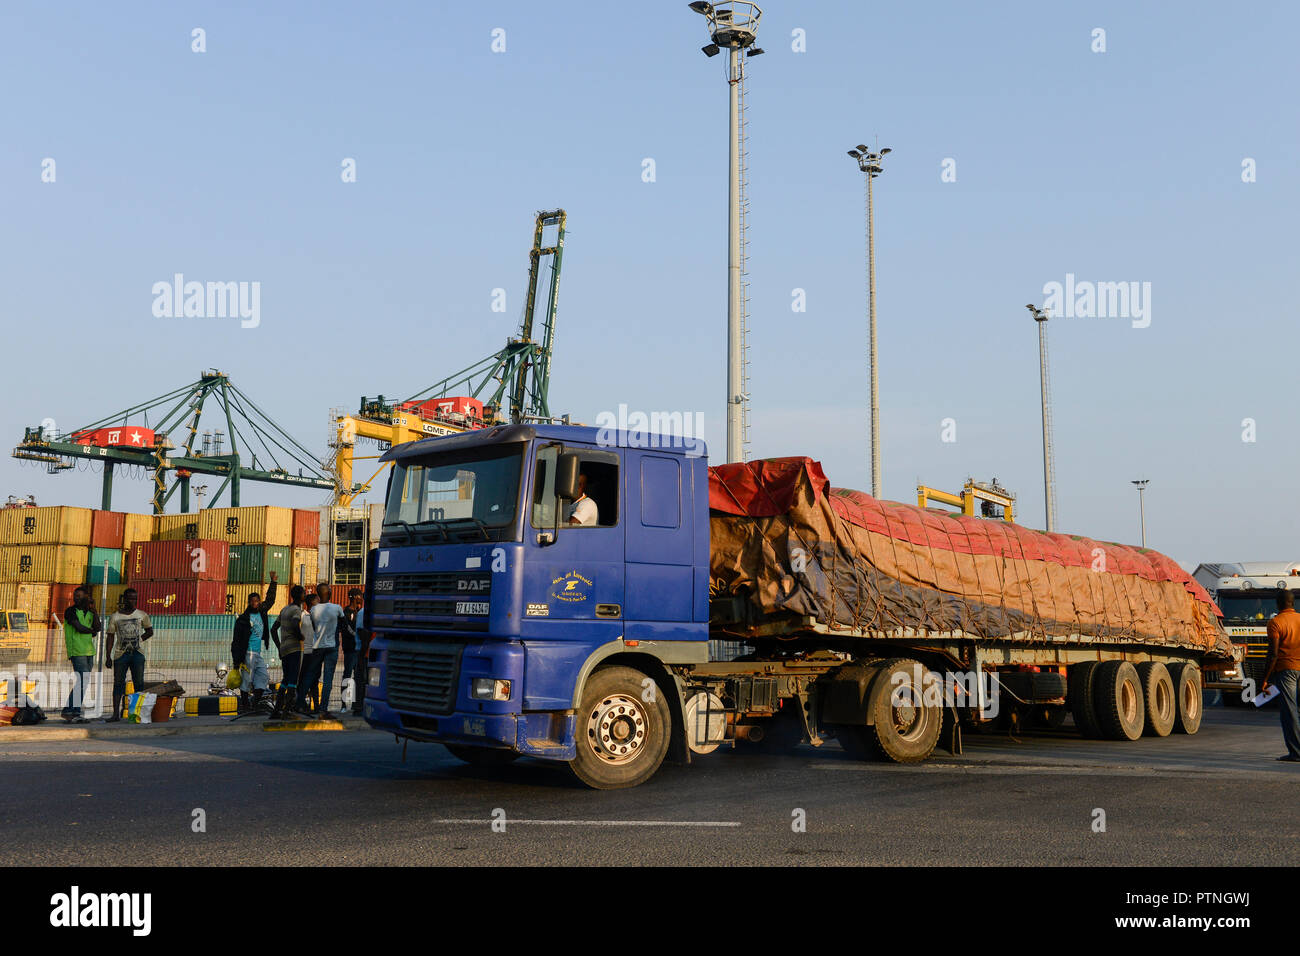 TOGO, Lome, LCT Lome Container Terminal, port Stock Photo